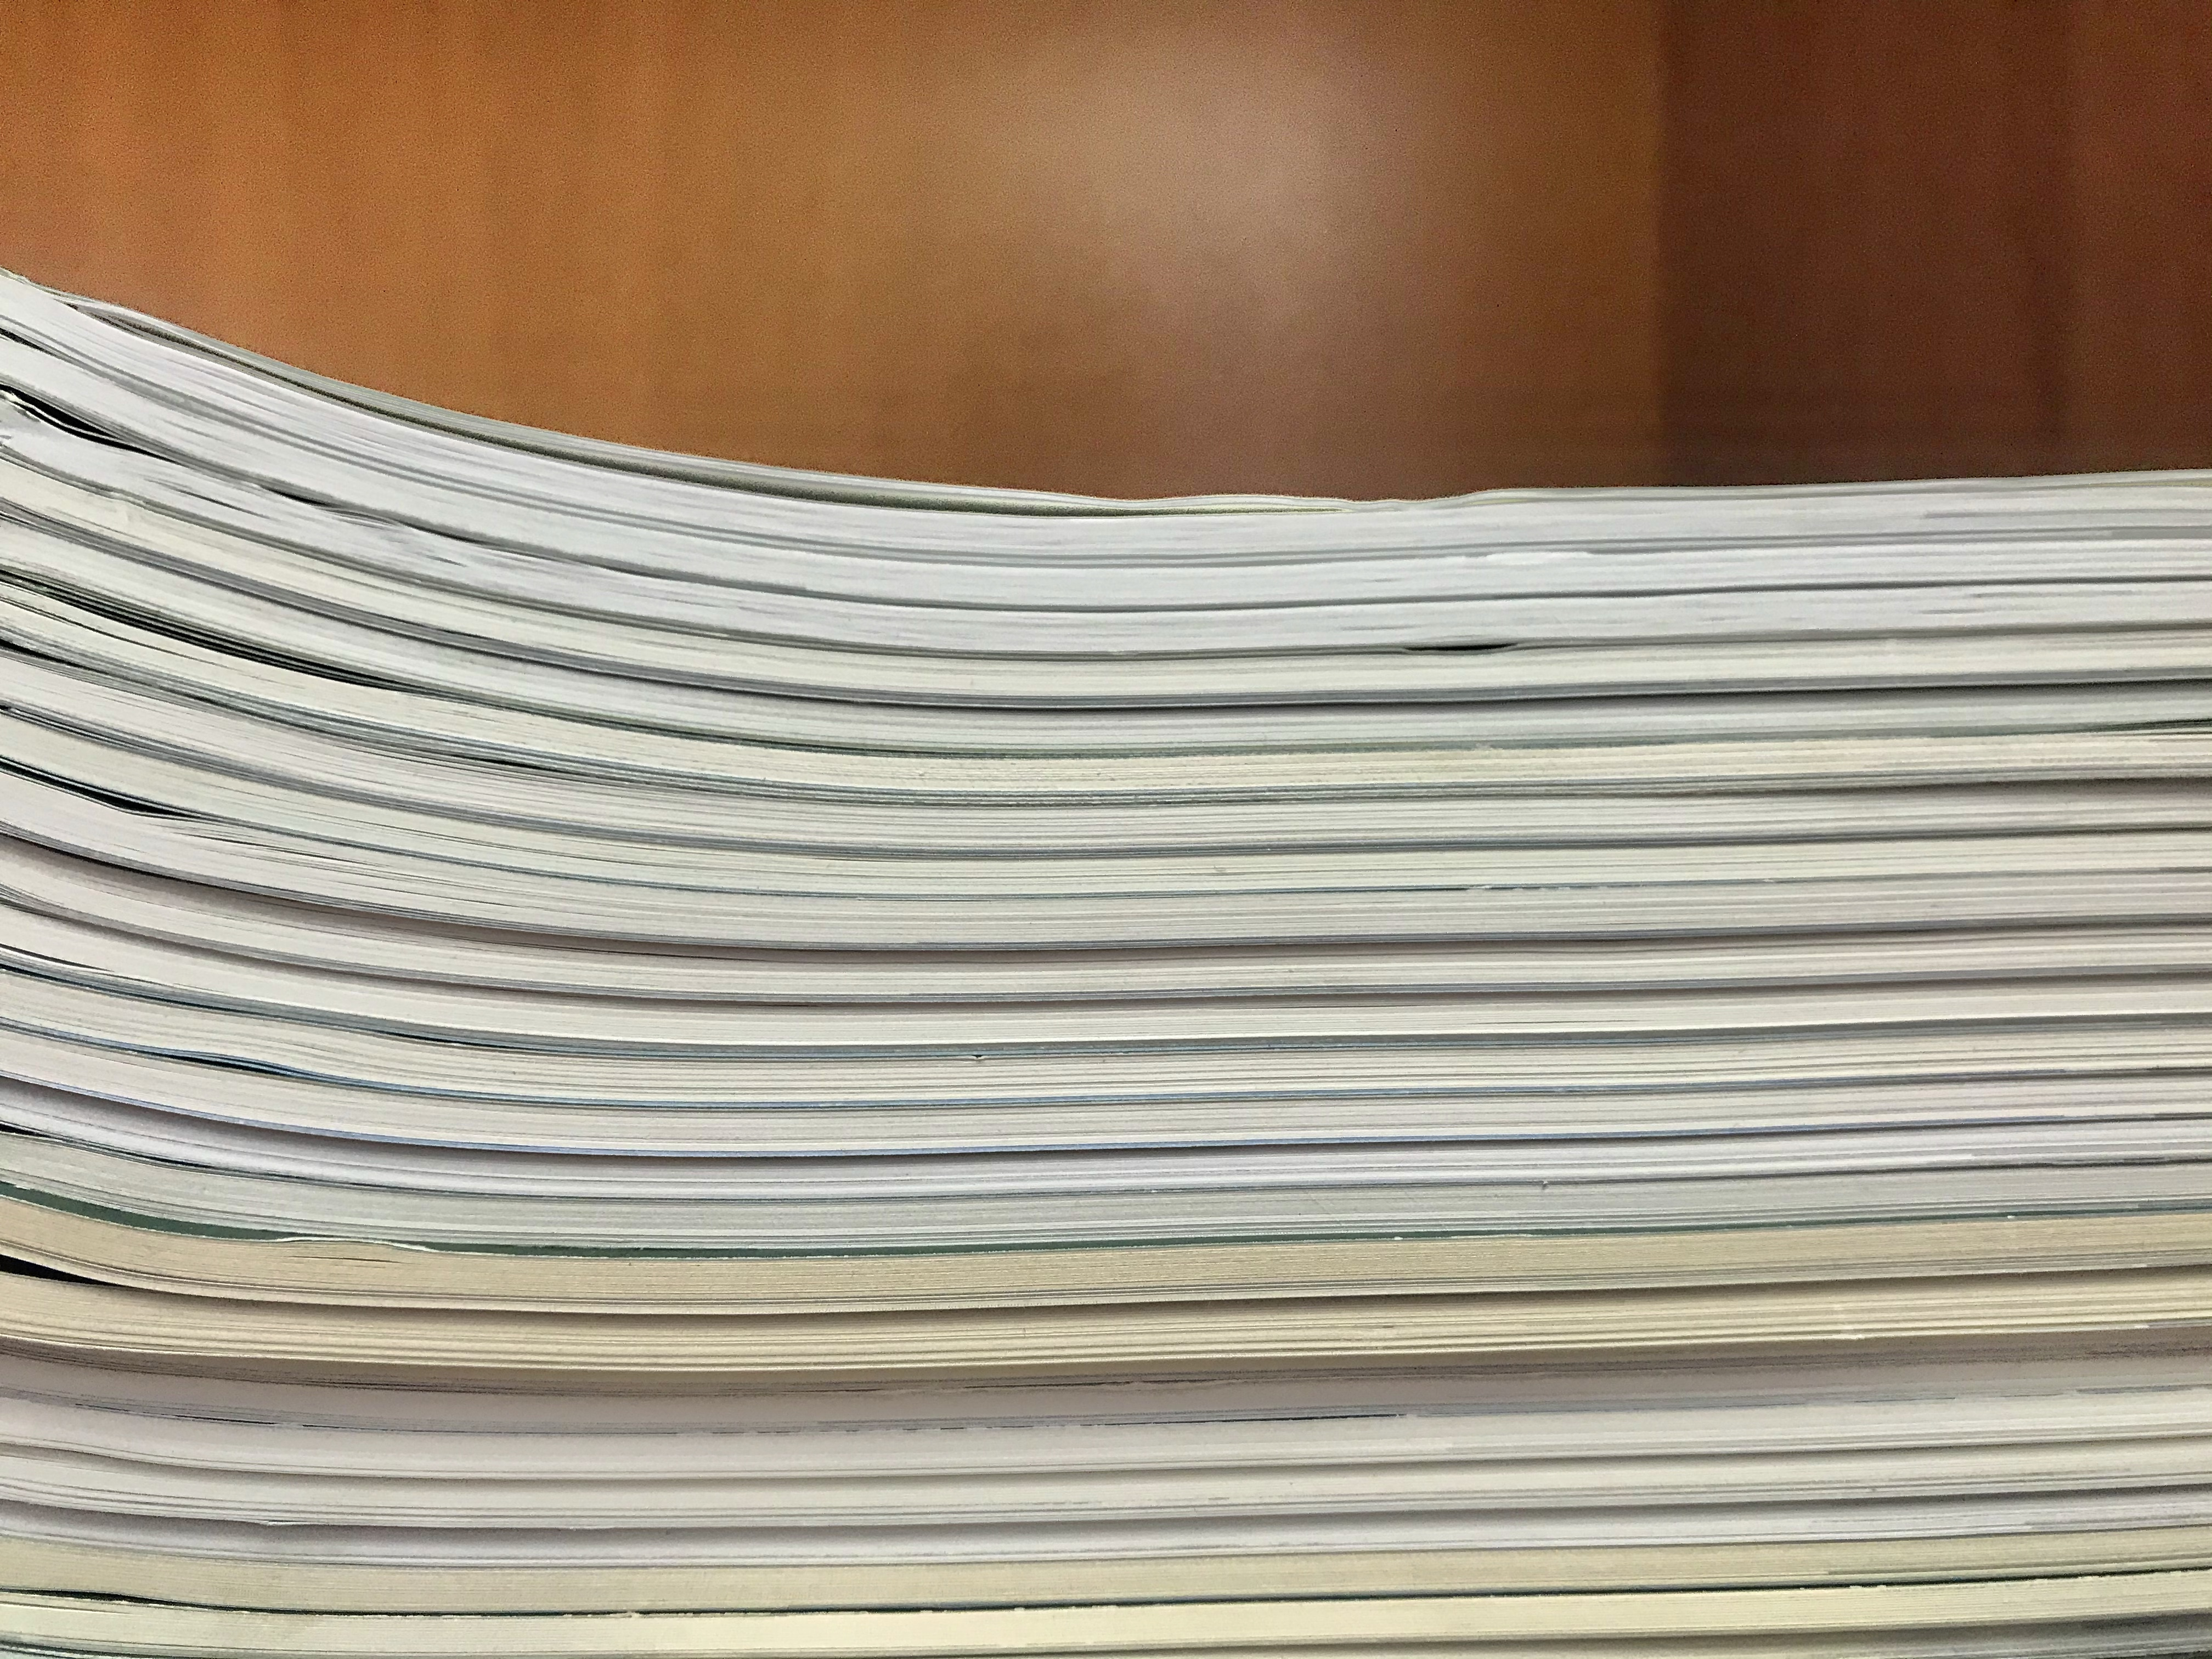 Stack of test booklets against a wooden background